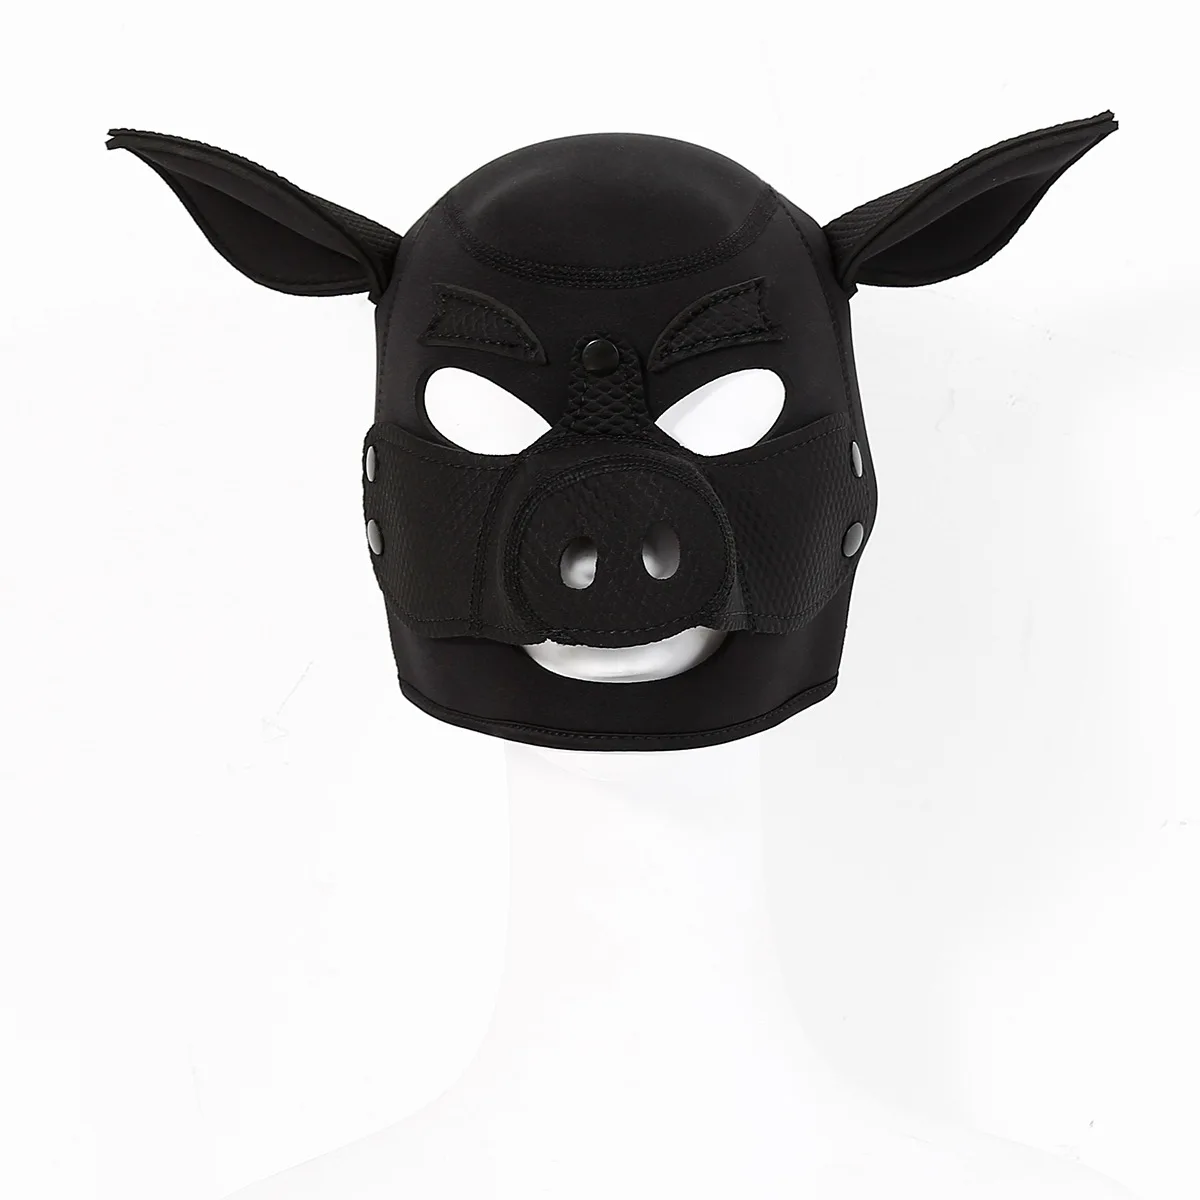 3D Mould Neoprene Fetish Full Face Black Red Pig Hood Mask Unisex Standard Hats Sexy Cap No Rear Zippper One Piece Style